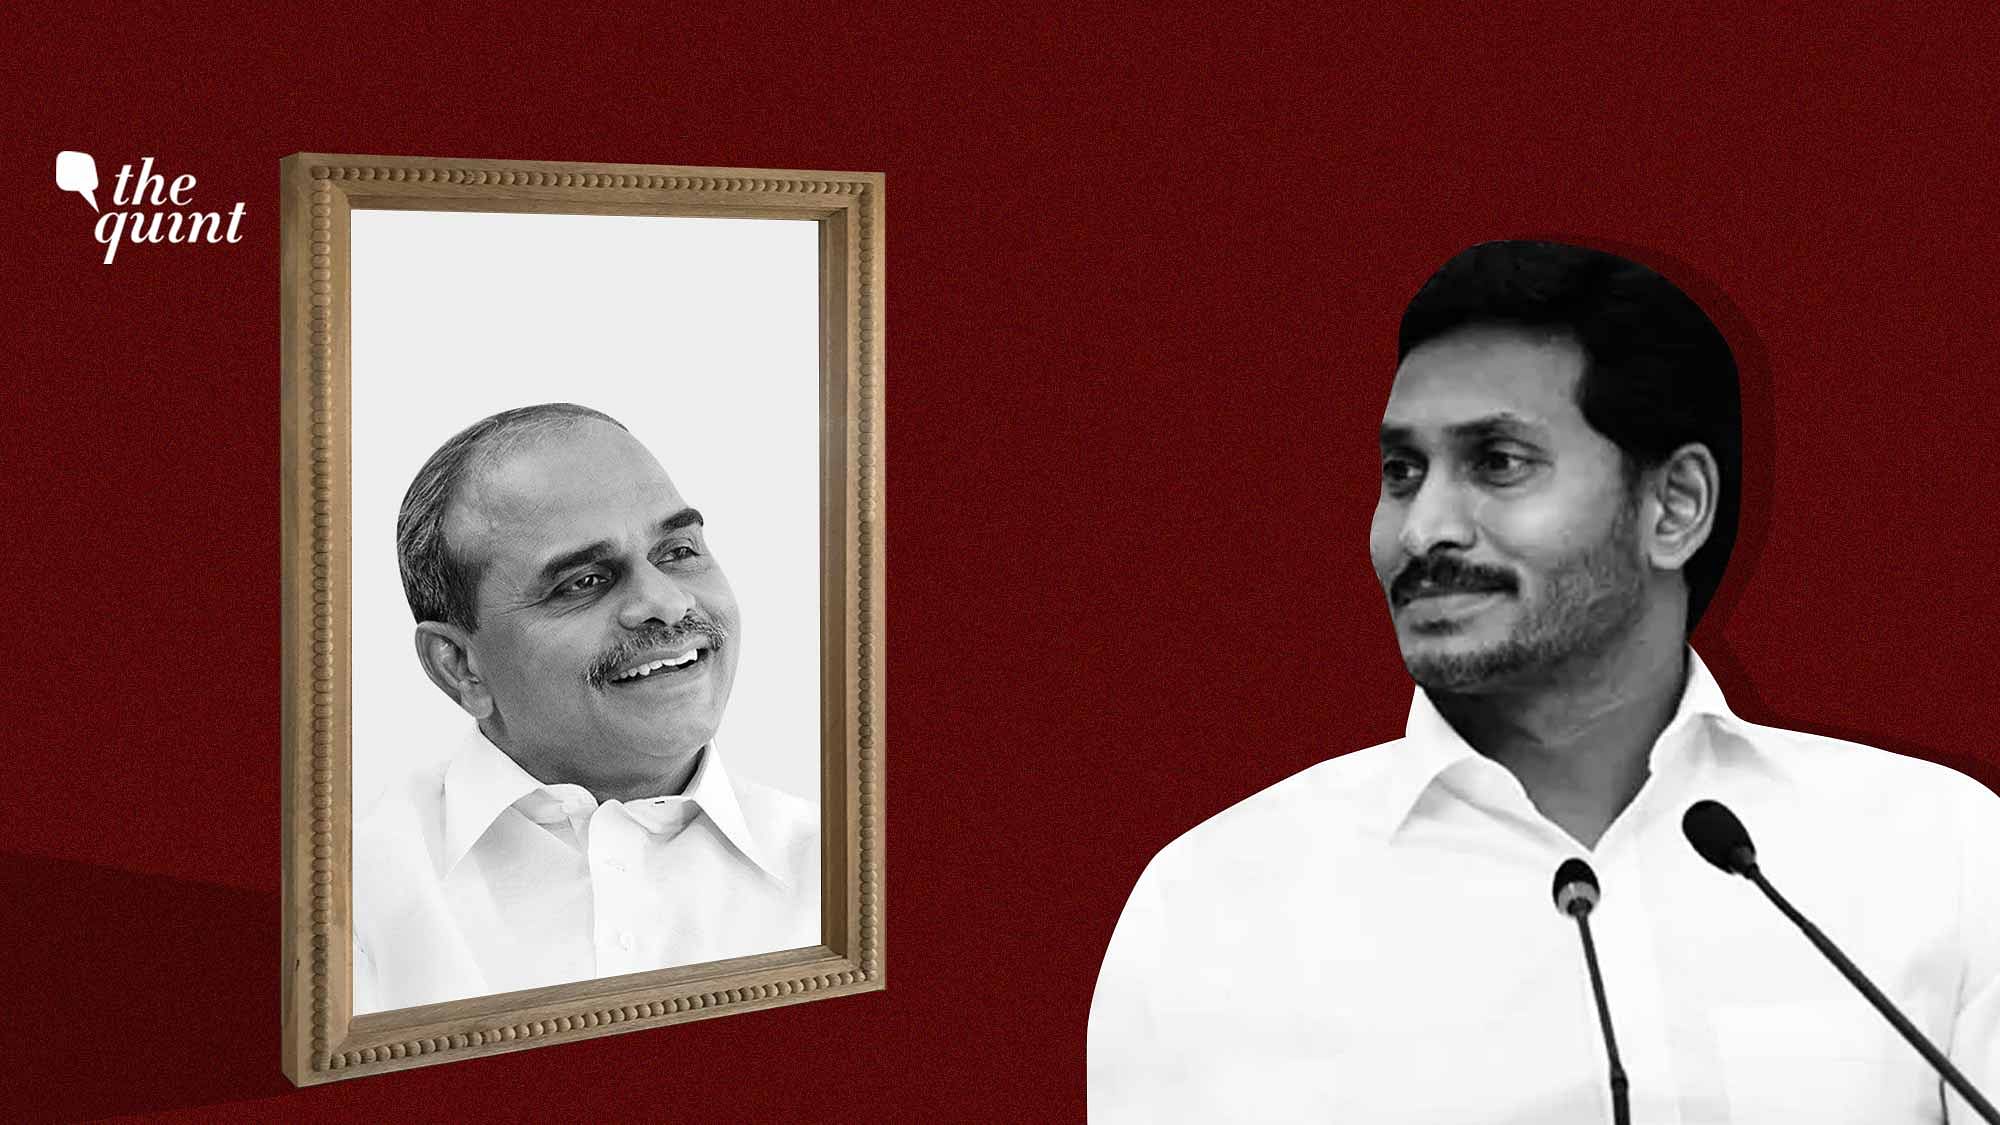 Image of Andhra CM Jagan Reddy (R) and his father, YSR Reddy (L) used for representational purposes.